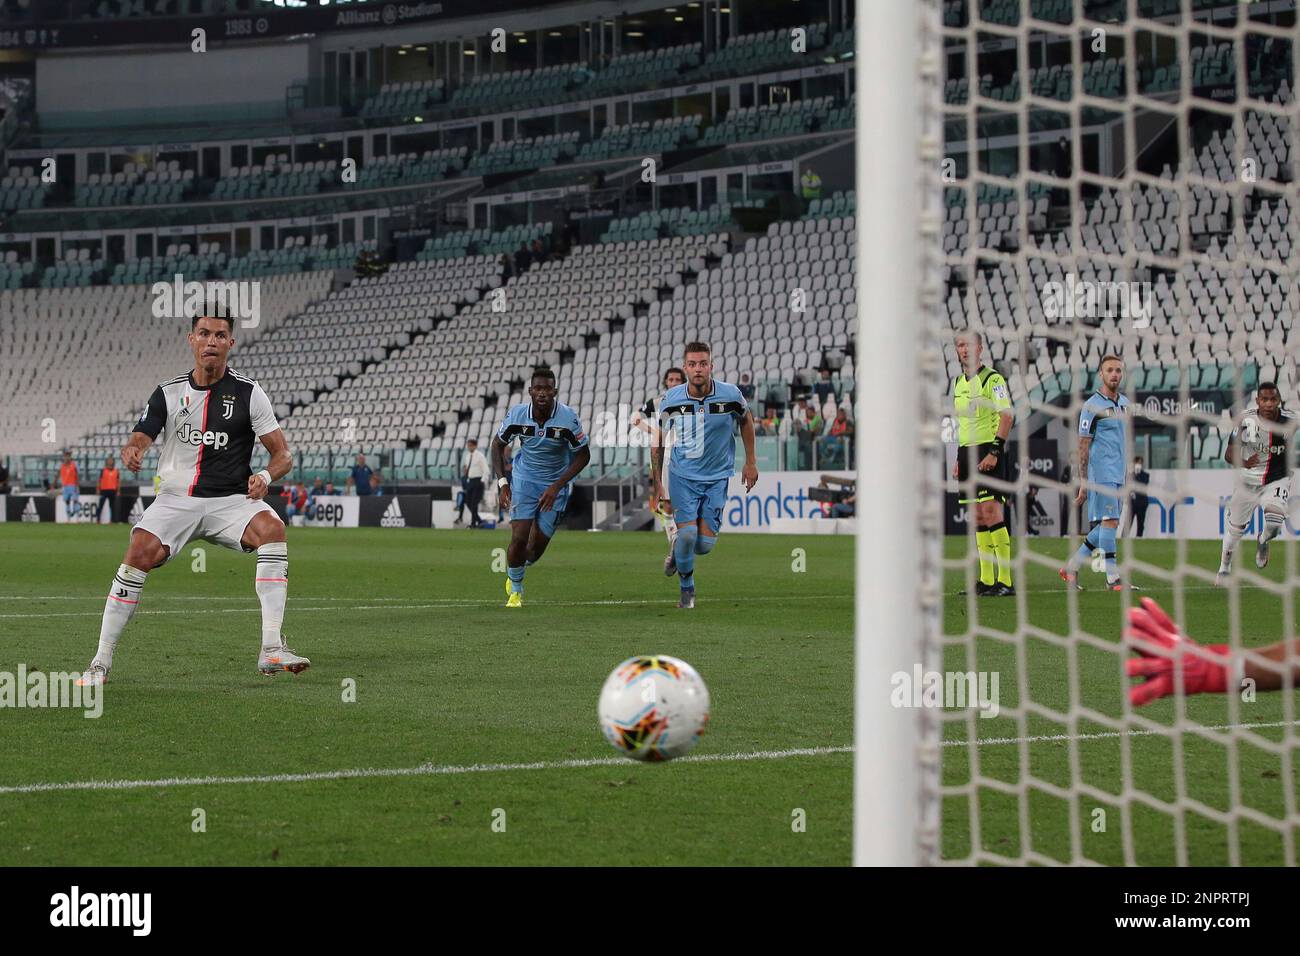 July 20, 2020, Turin, United Kingdom: Portuguese striker Cristiano Ronaldo  of Juventus scores form the penalty mark to give the side a 1-0 lead during  the Serie A match at Allianz Stadium,